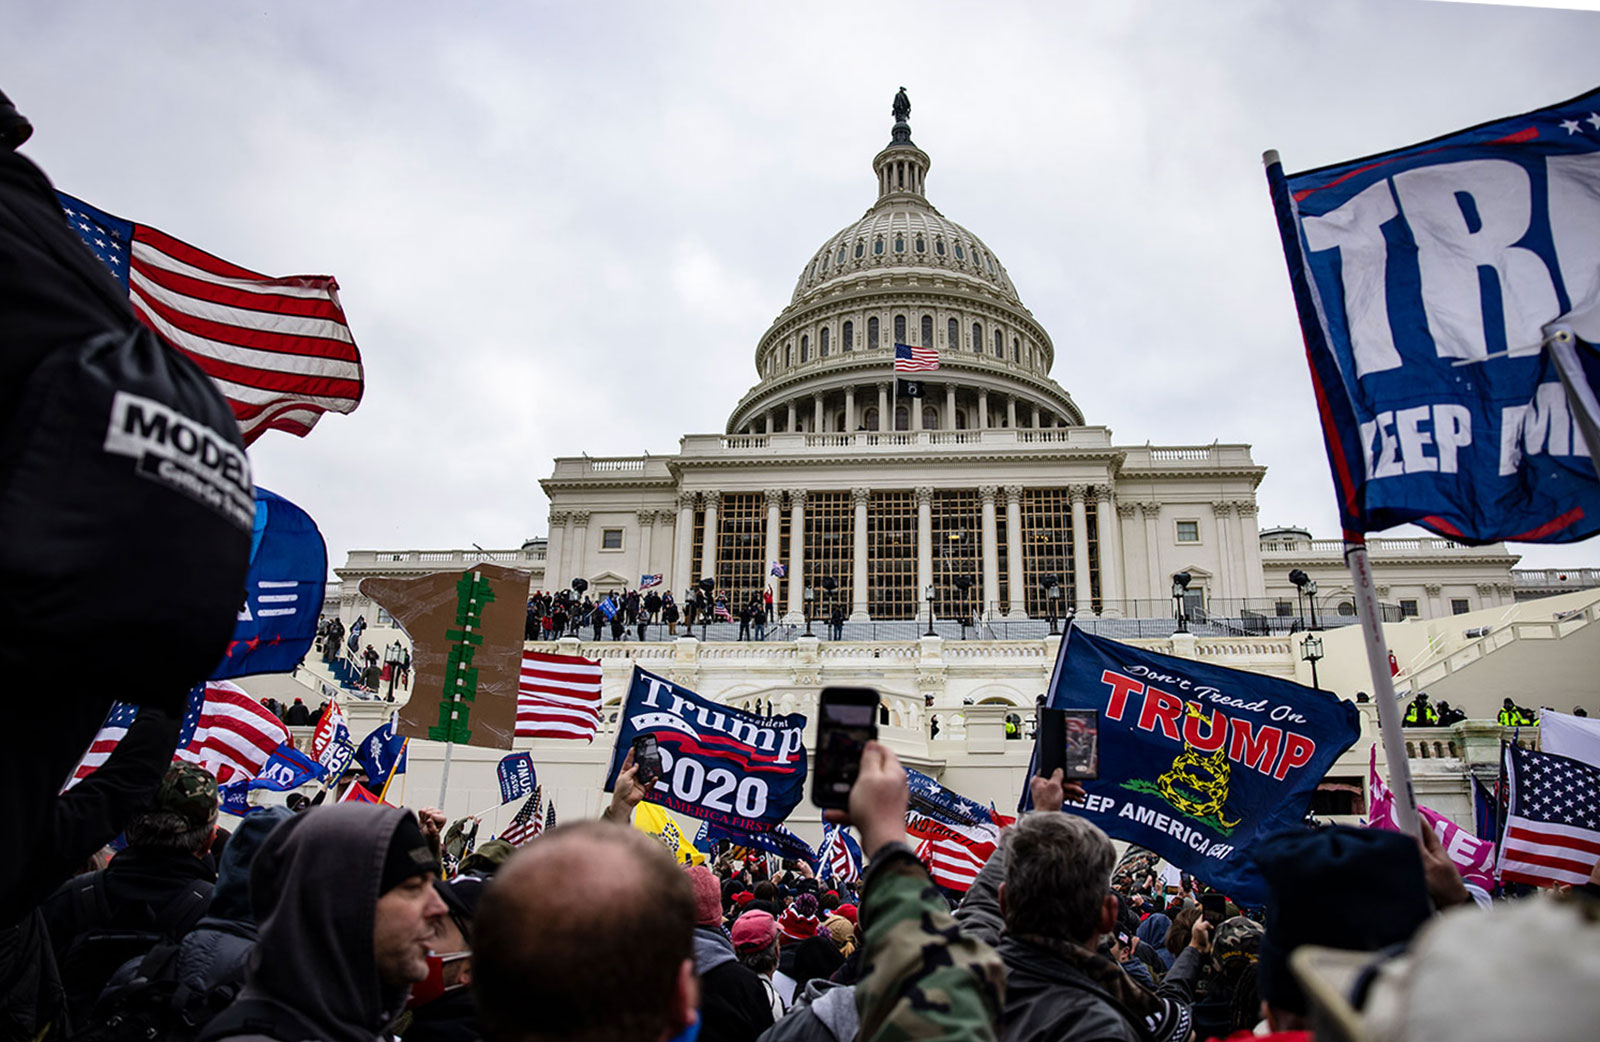 Pro-Trump supporters storm the US Capitol following a rally on January 6, 2021 in Washington, DC. 